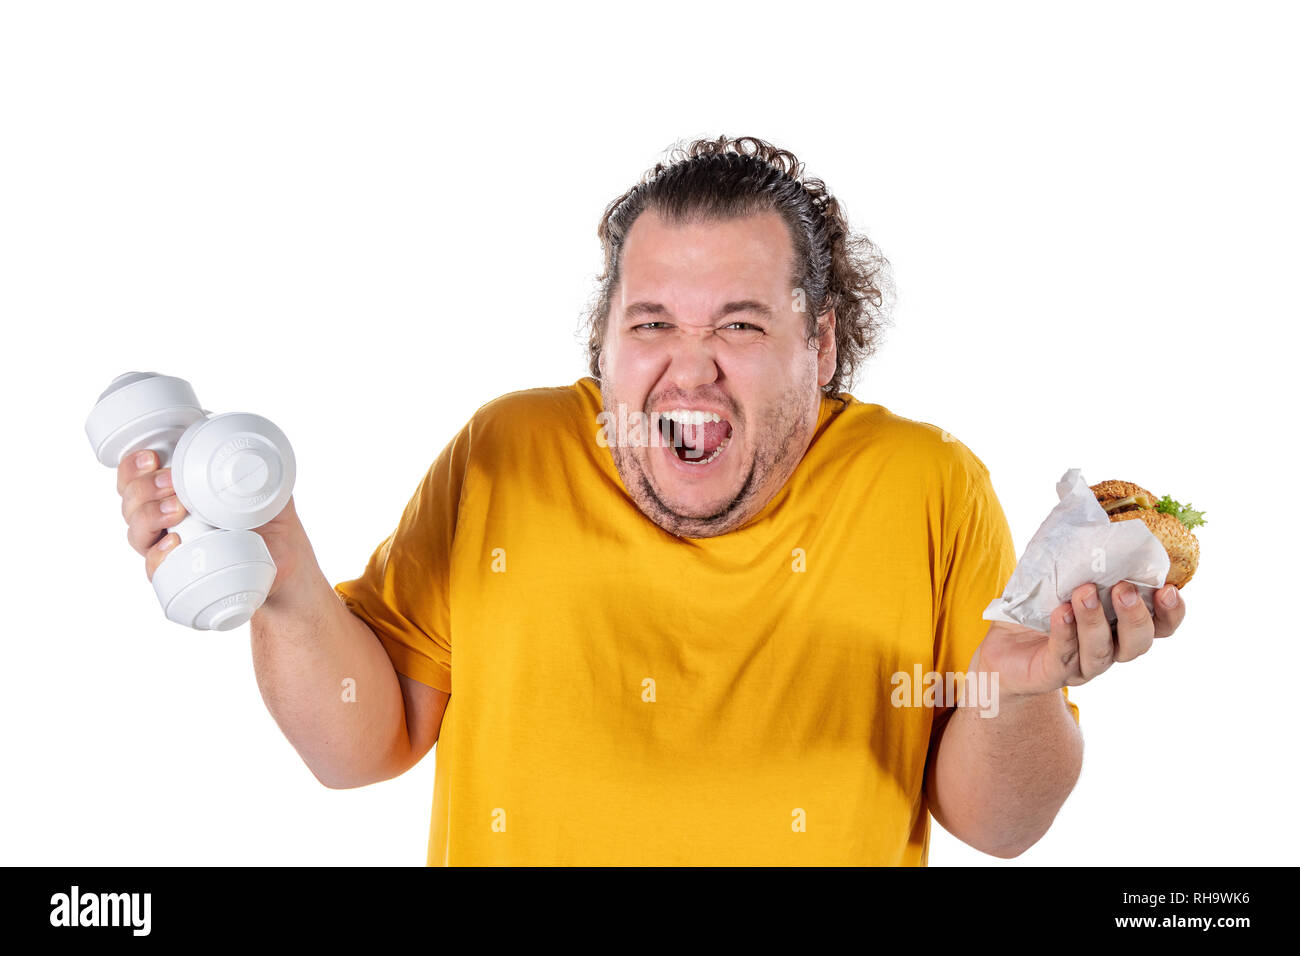 Funny fat man eating unhealthy food and trying to take exercise isolated Stock Photo